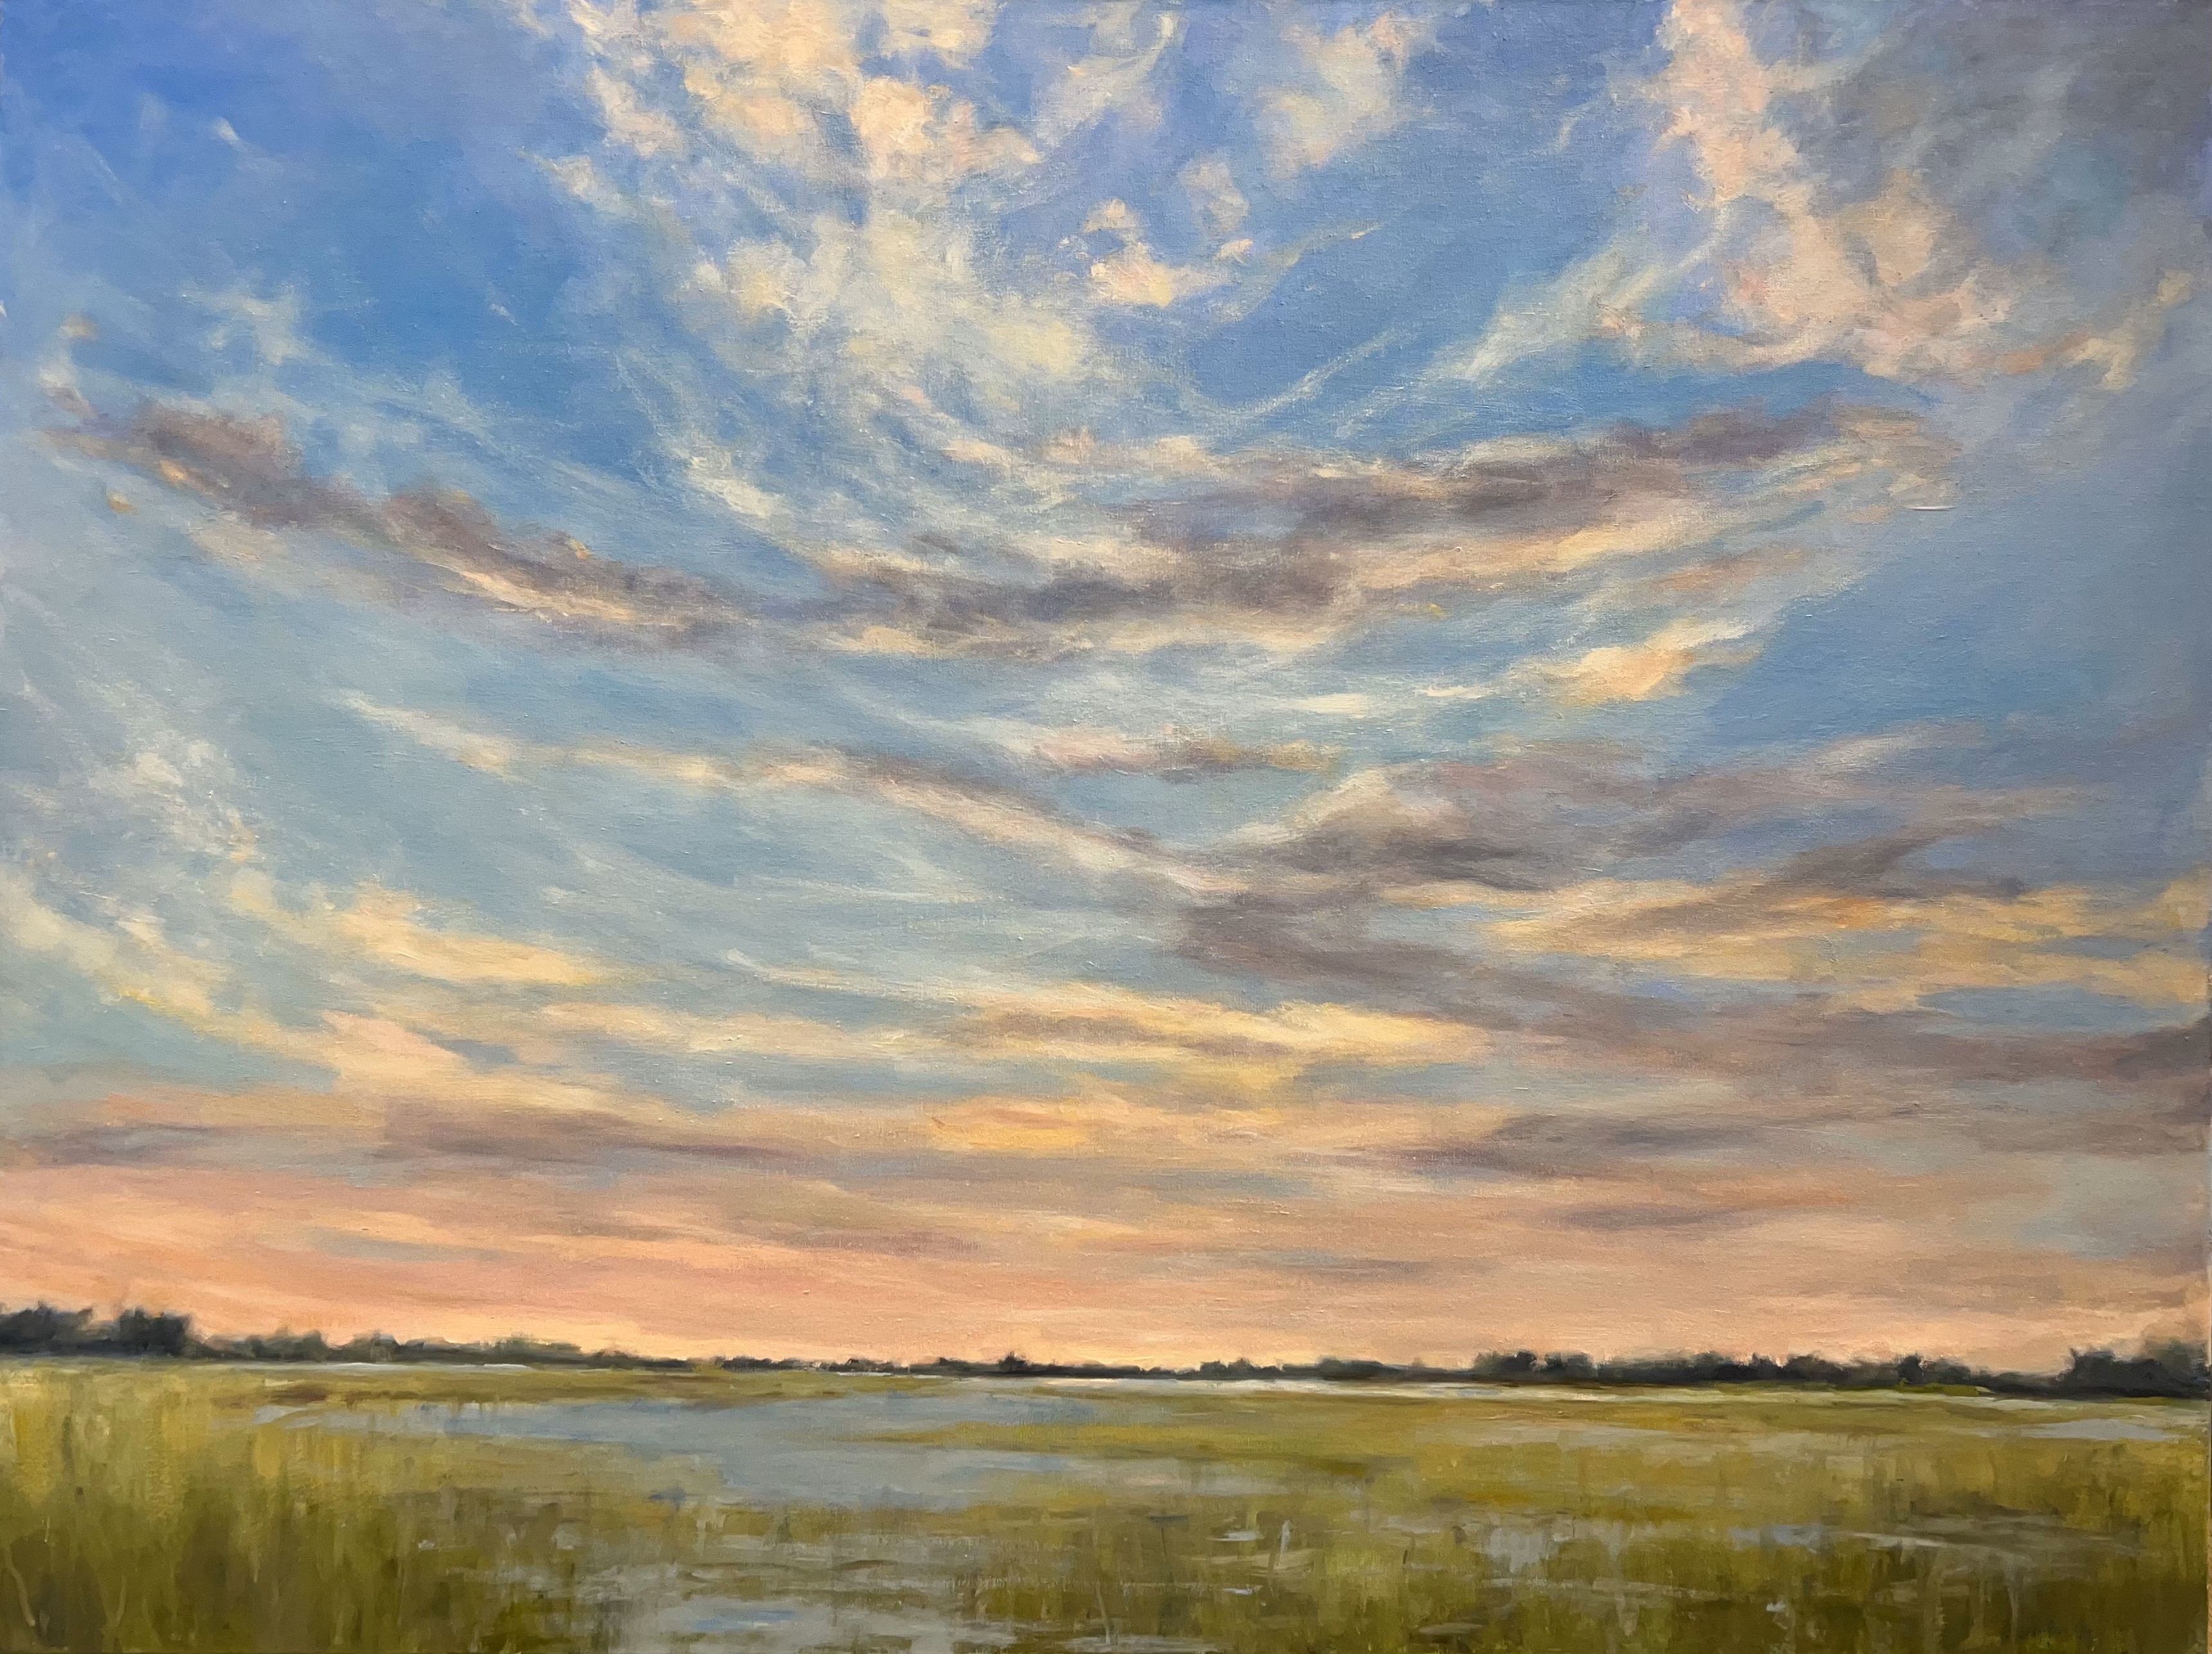 JUDY BUCKLEY - Sunset on the Bay - Oil on Canvas - 30x40 inches